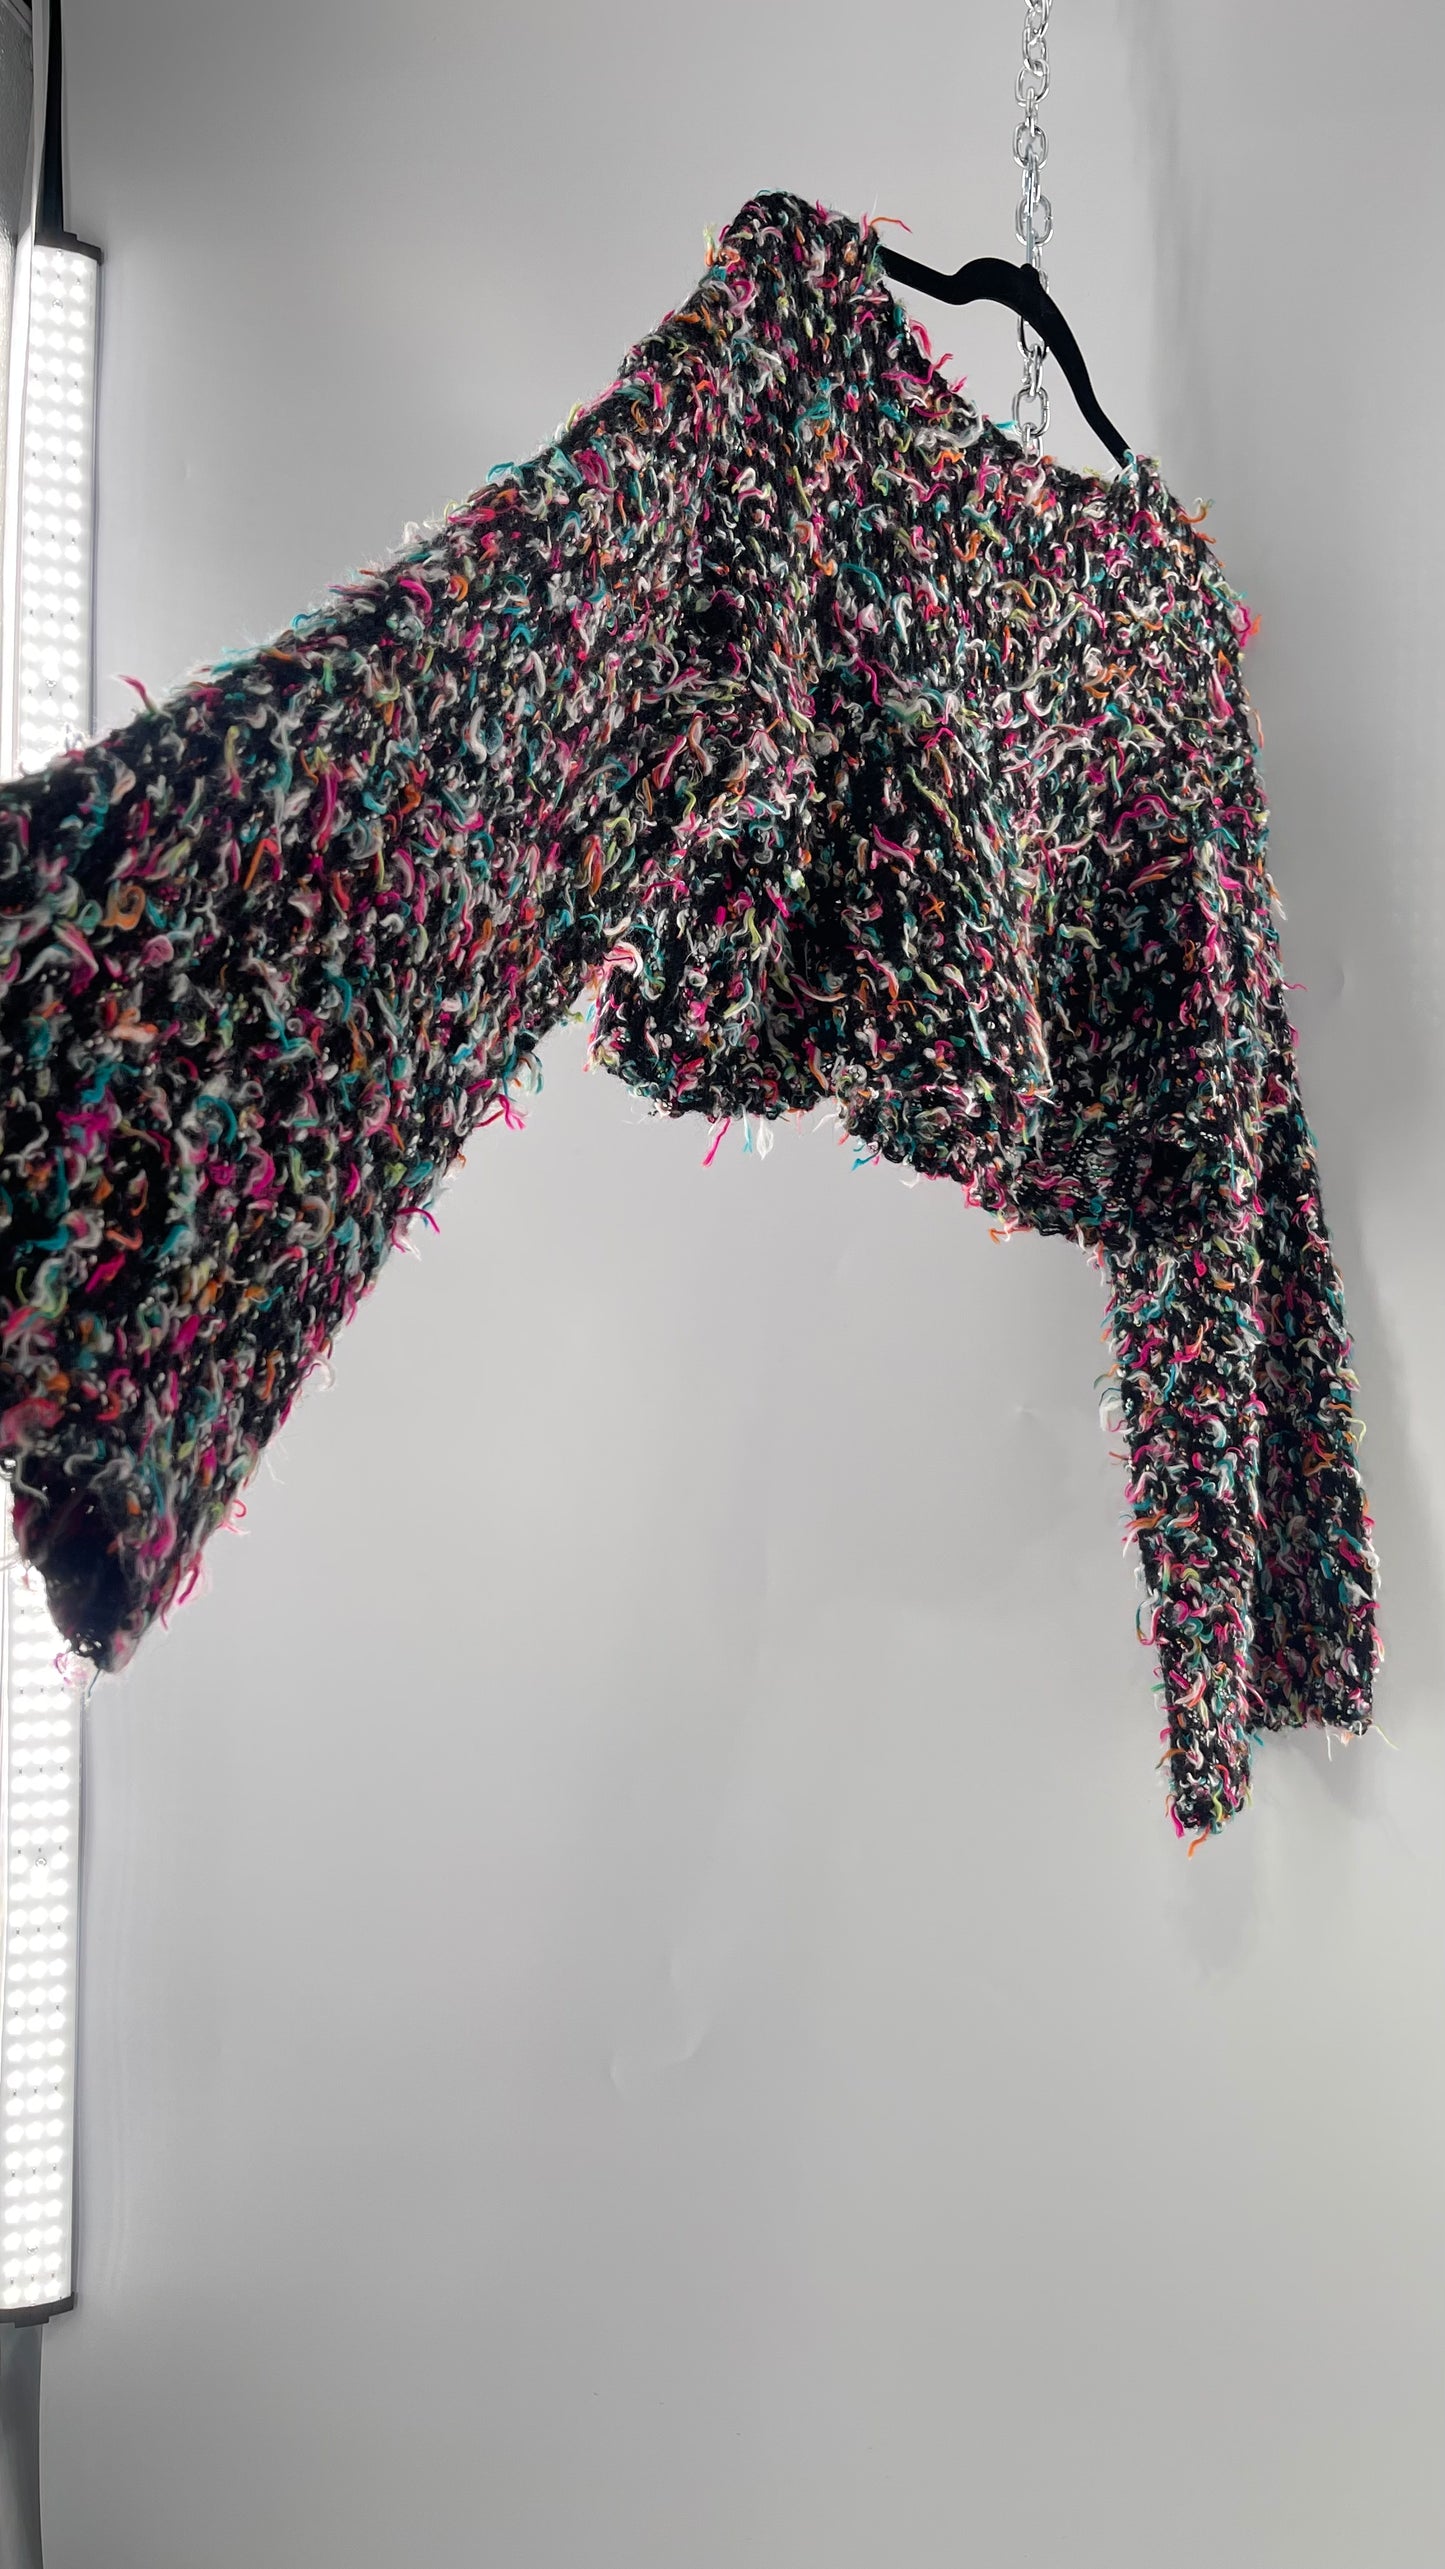 Urban Outfitters Shaggy Black Cropped Sweater with Colorful Threads (Medium)